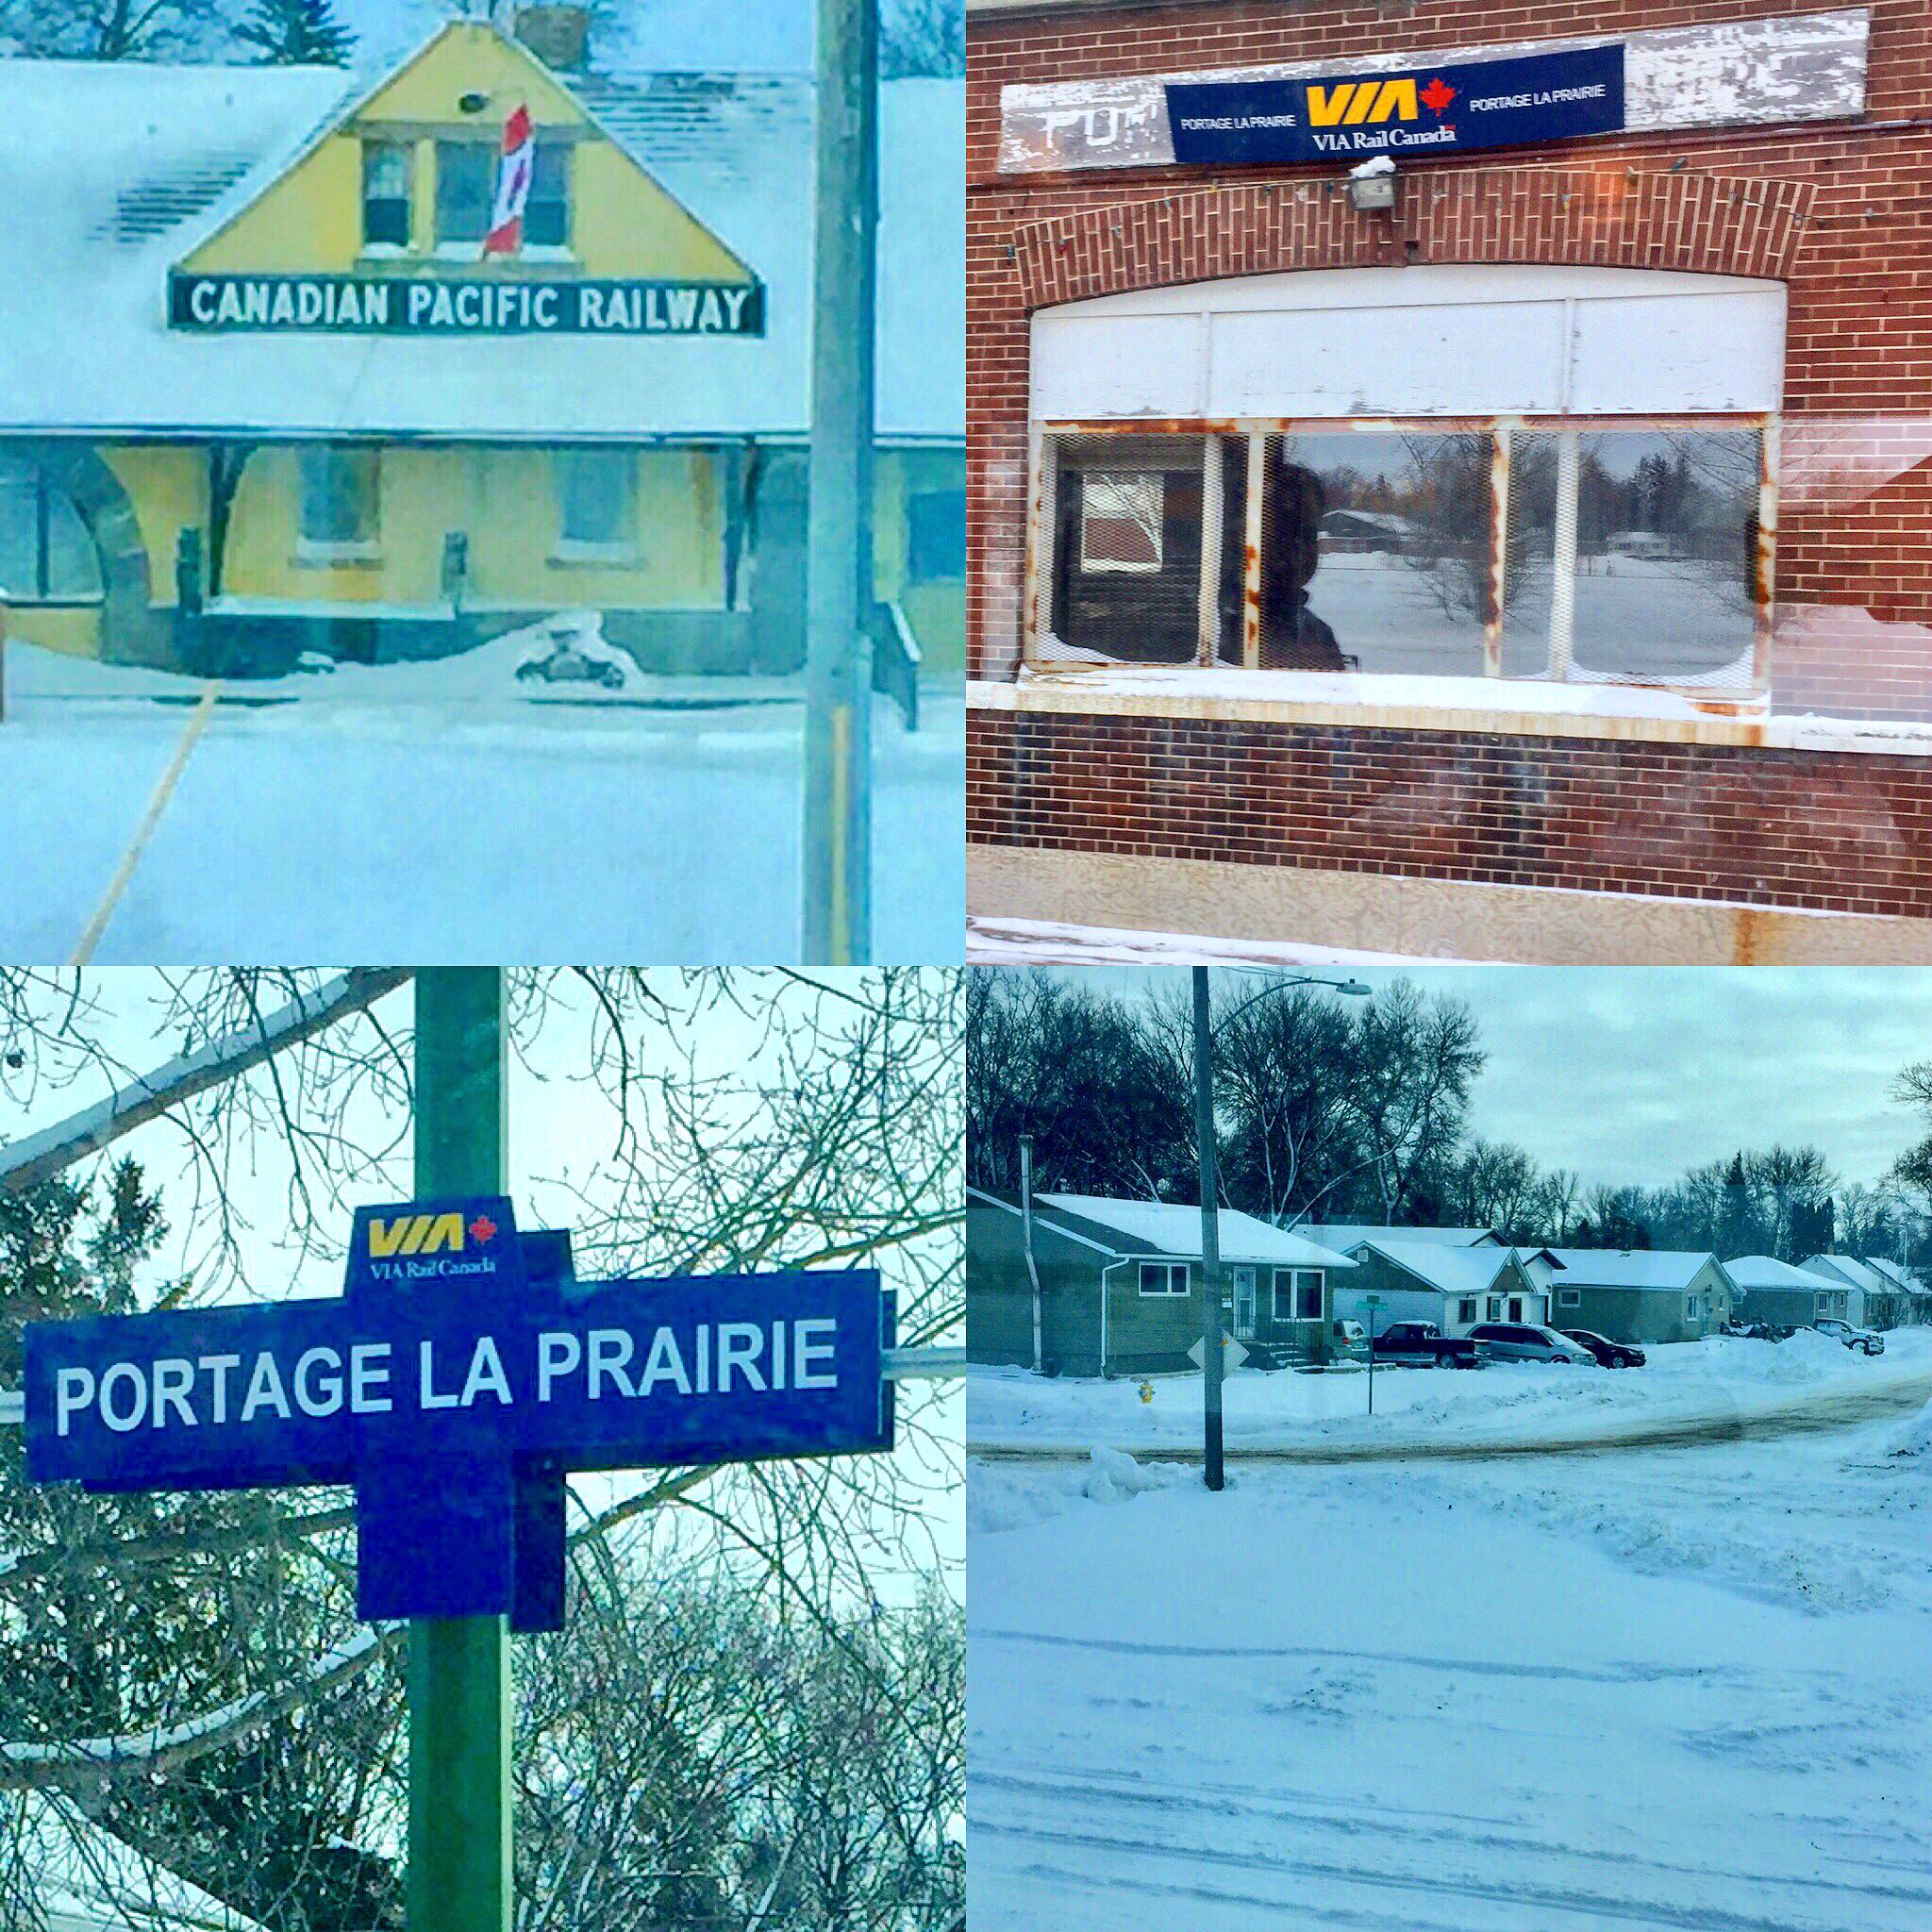 Welcome to Portage La Prairie, MB